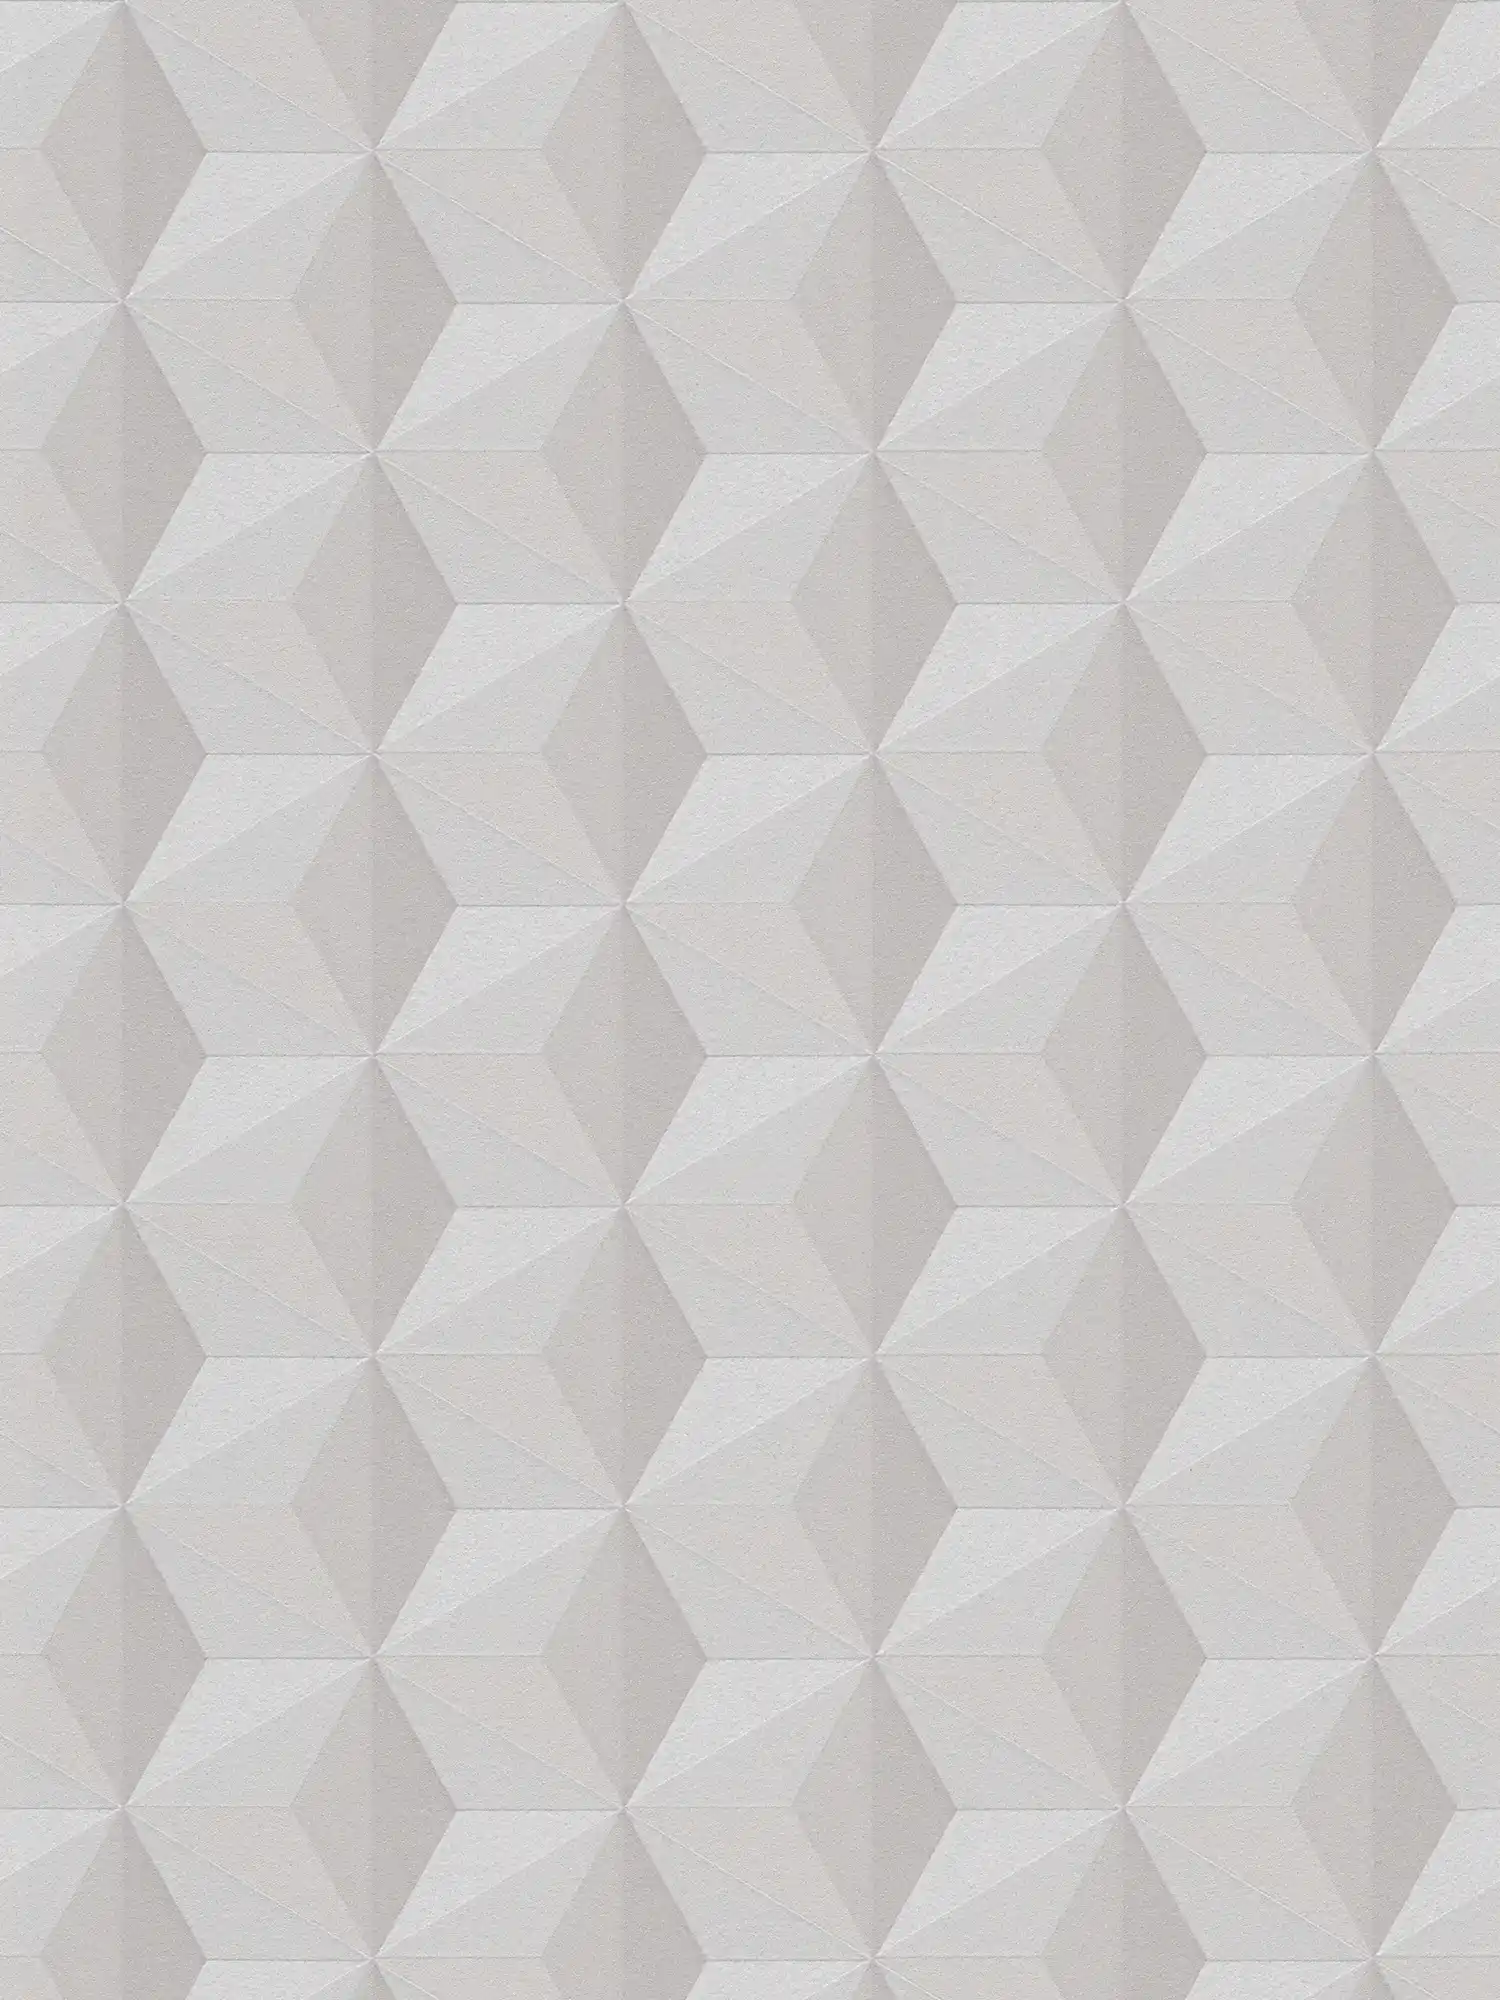 Pattern wallpaper with graphic design & 3D effect - beige
